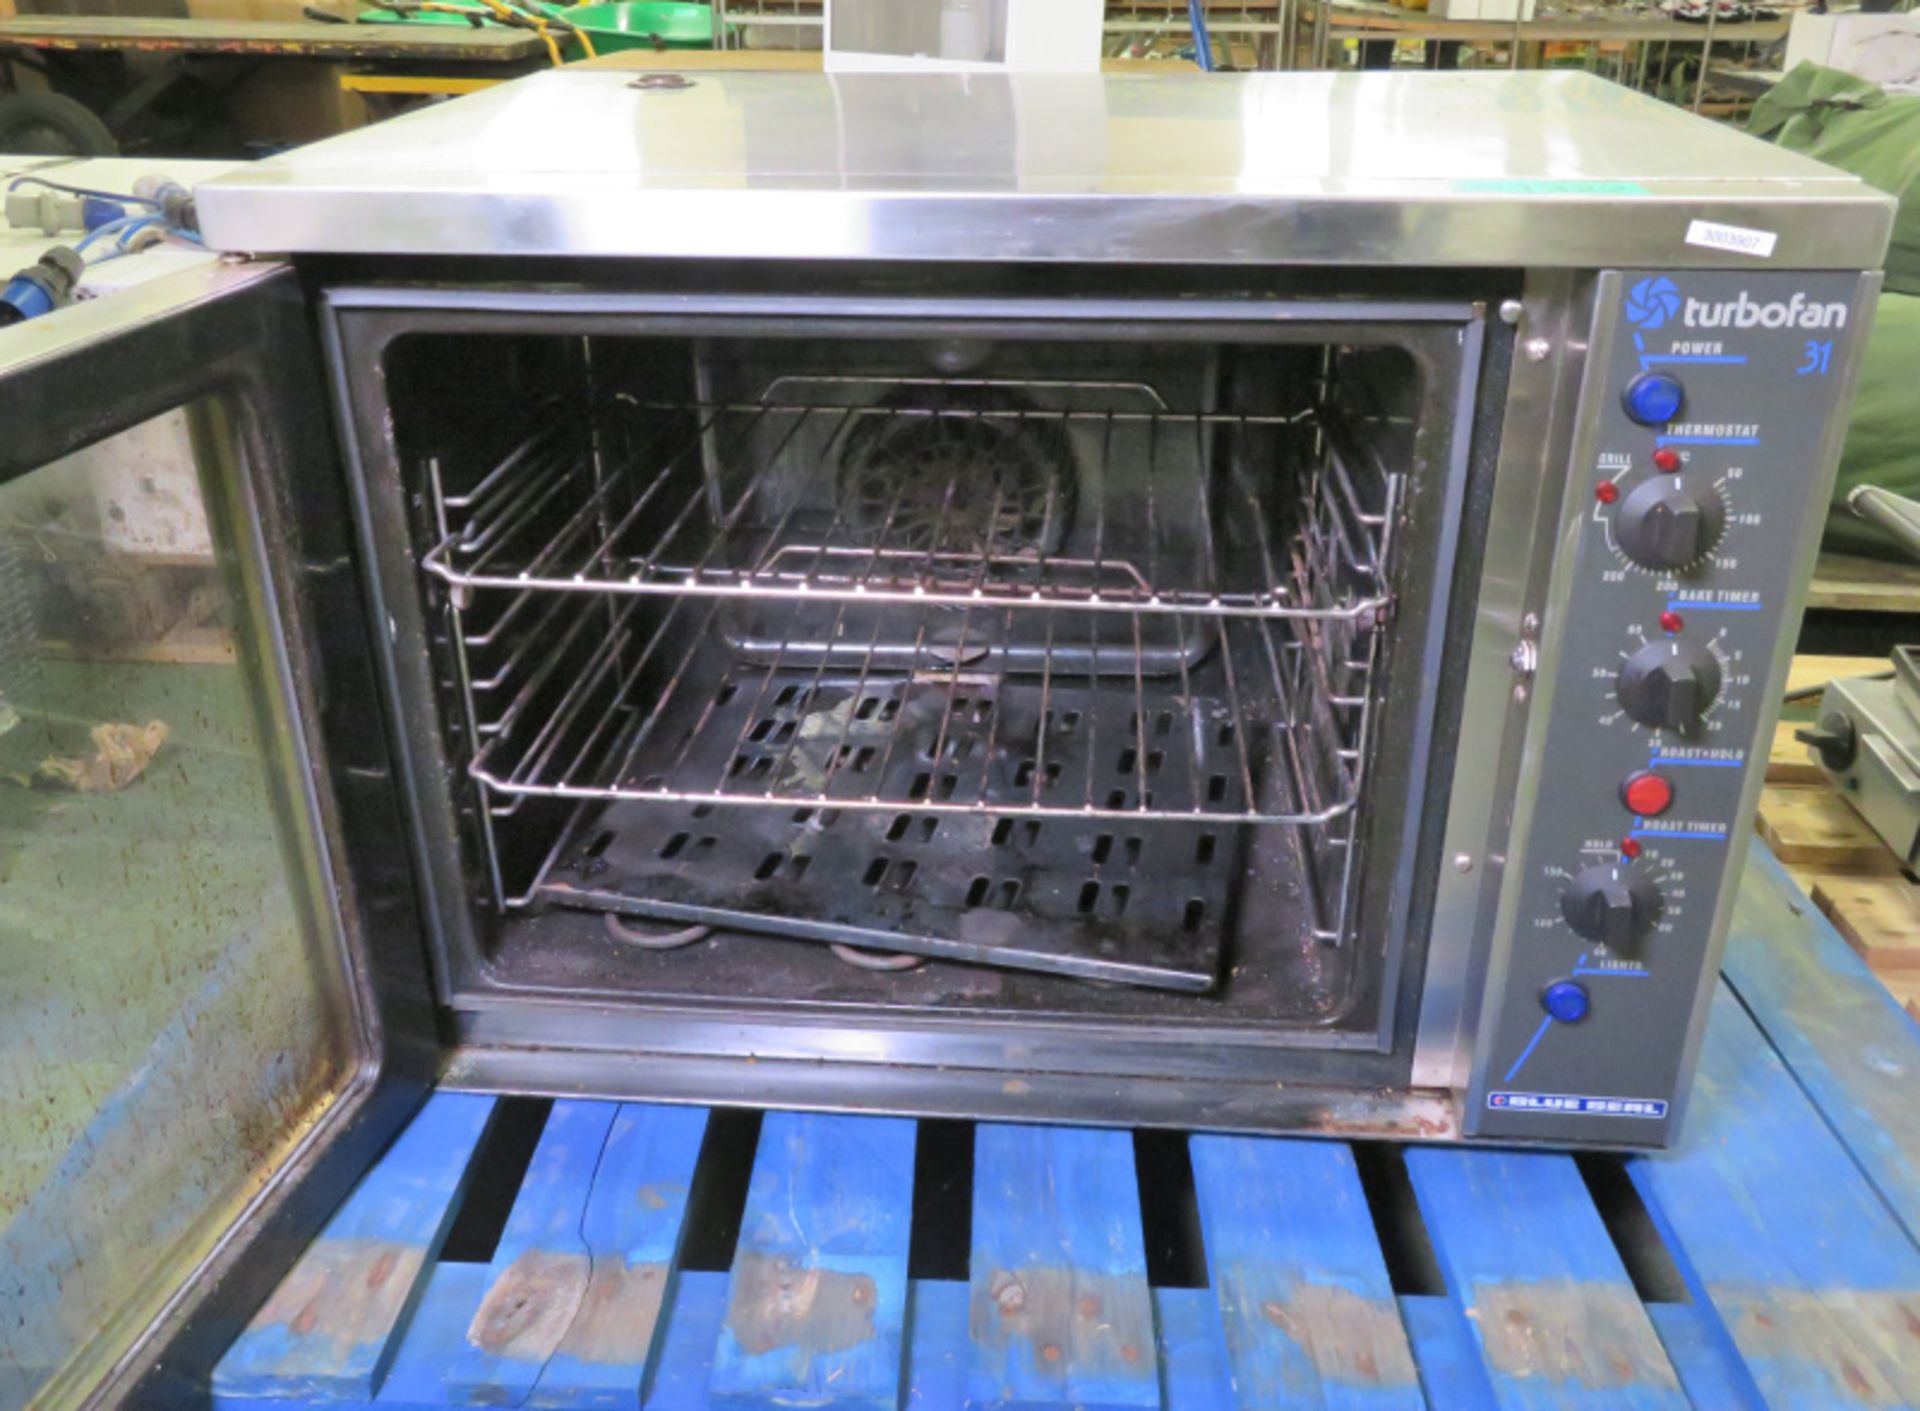 Blue Seal E33MS Turbofan Oven 240v L 800mm x W 700mm x H 580mm - Image 5 of 6